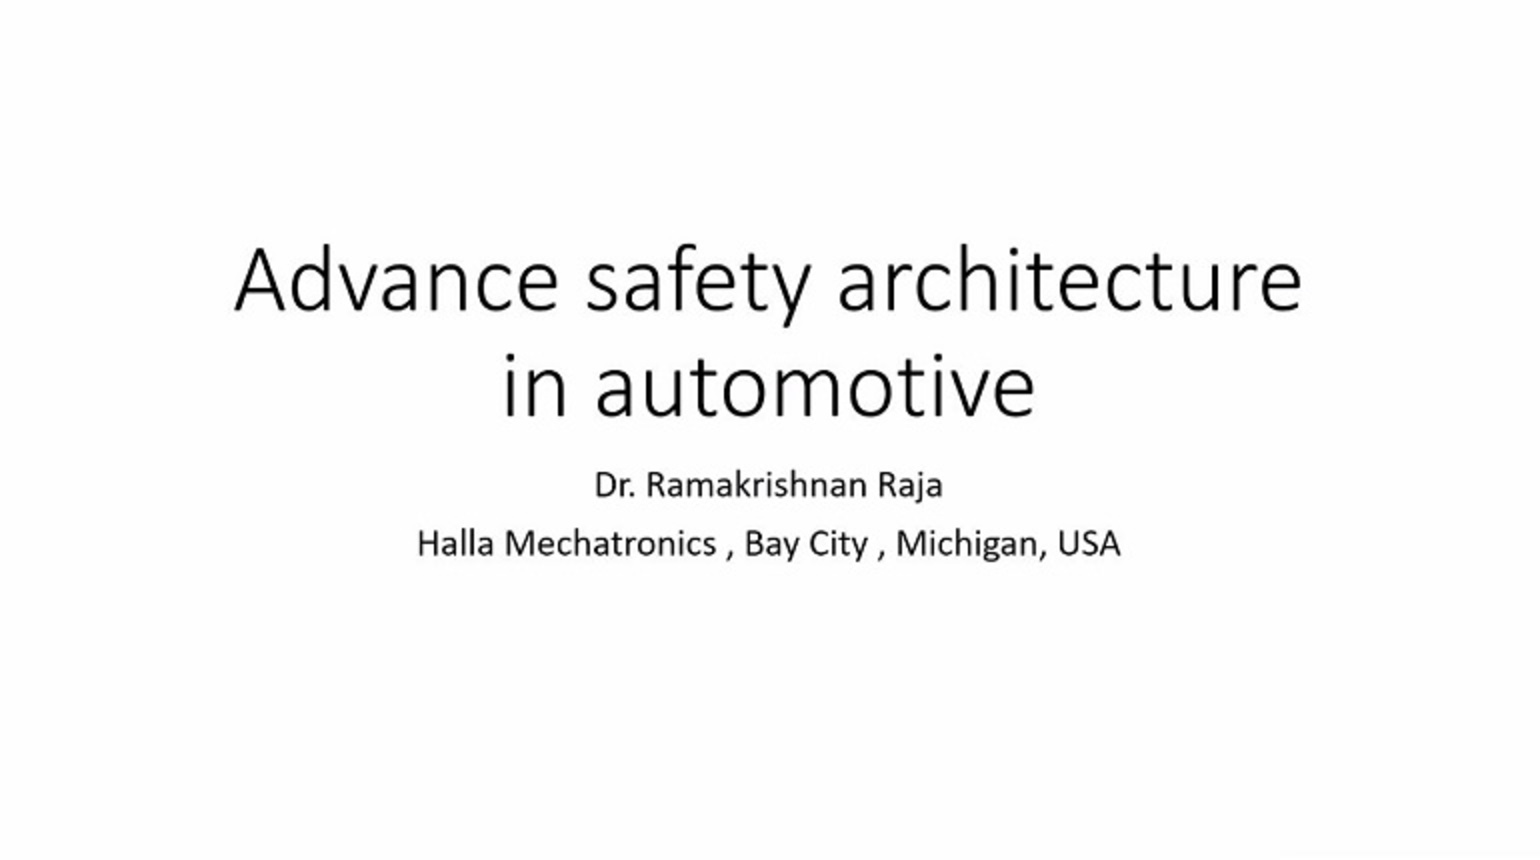 Advanced Safety Architecture for Automotive Systems